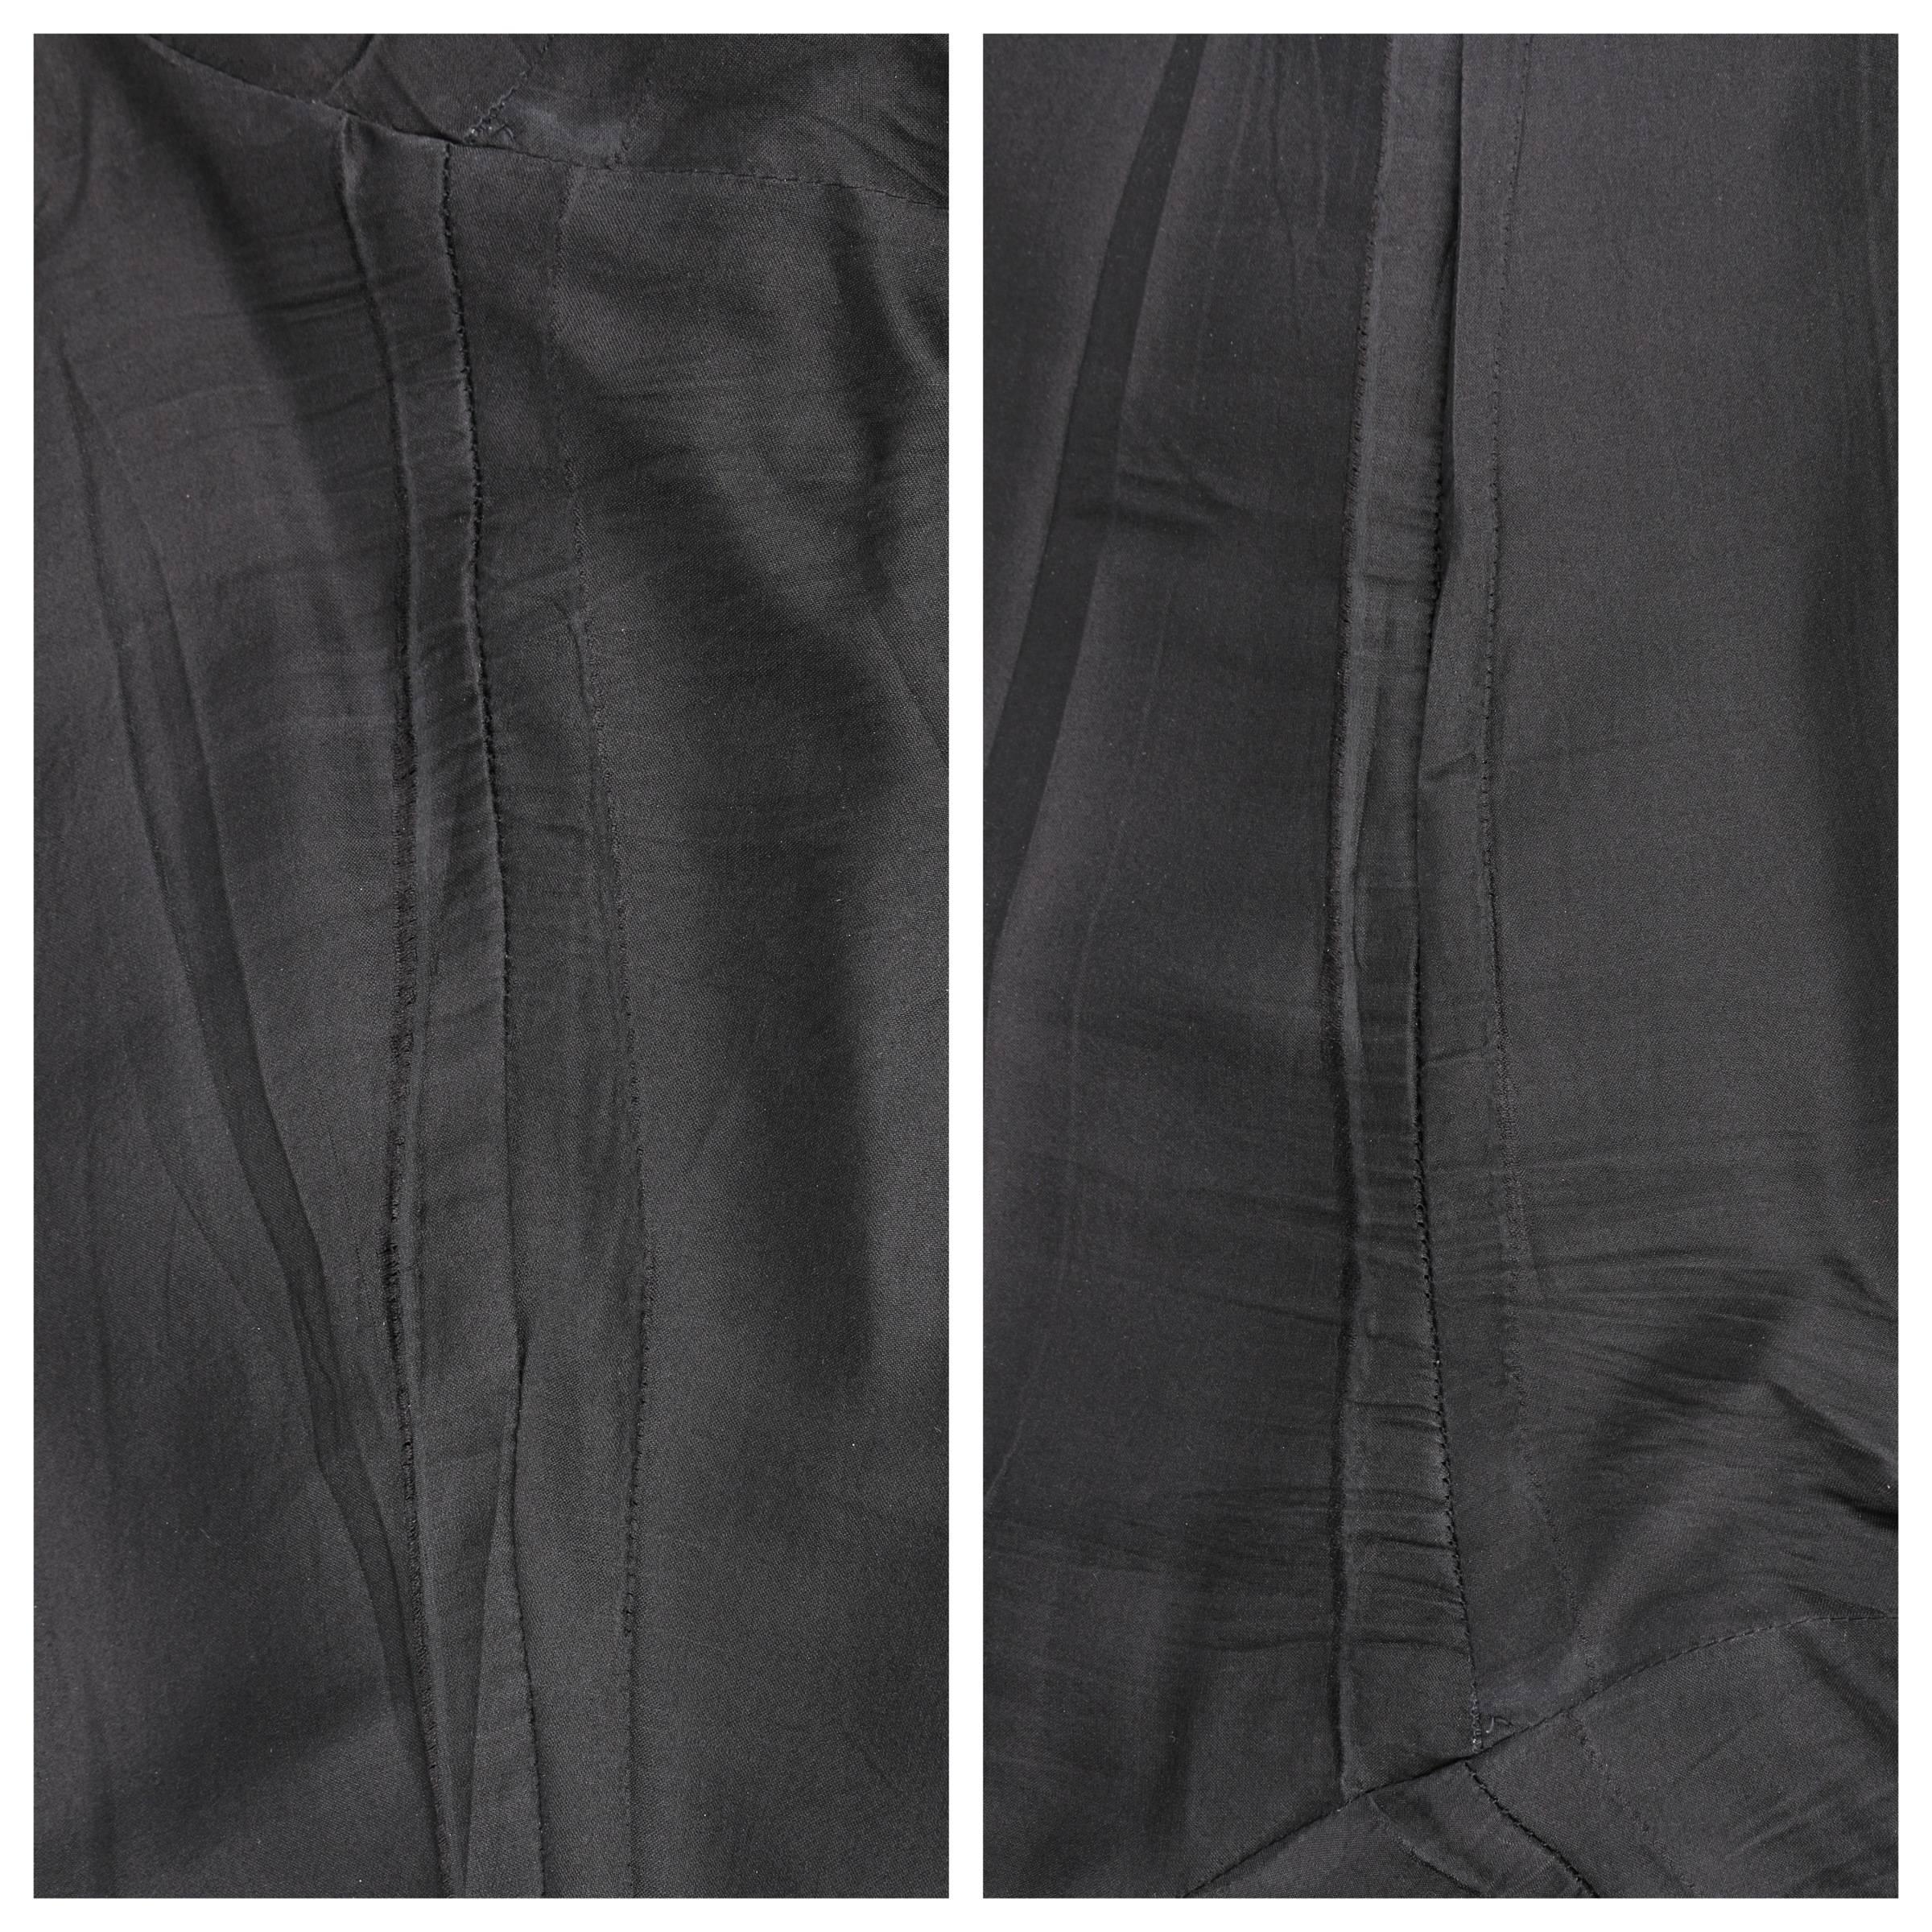 CHANEL S/S 2003 Classic Black Wool Slim Cut Cropped Pants Trousers 4